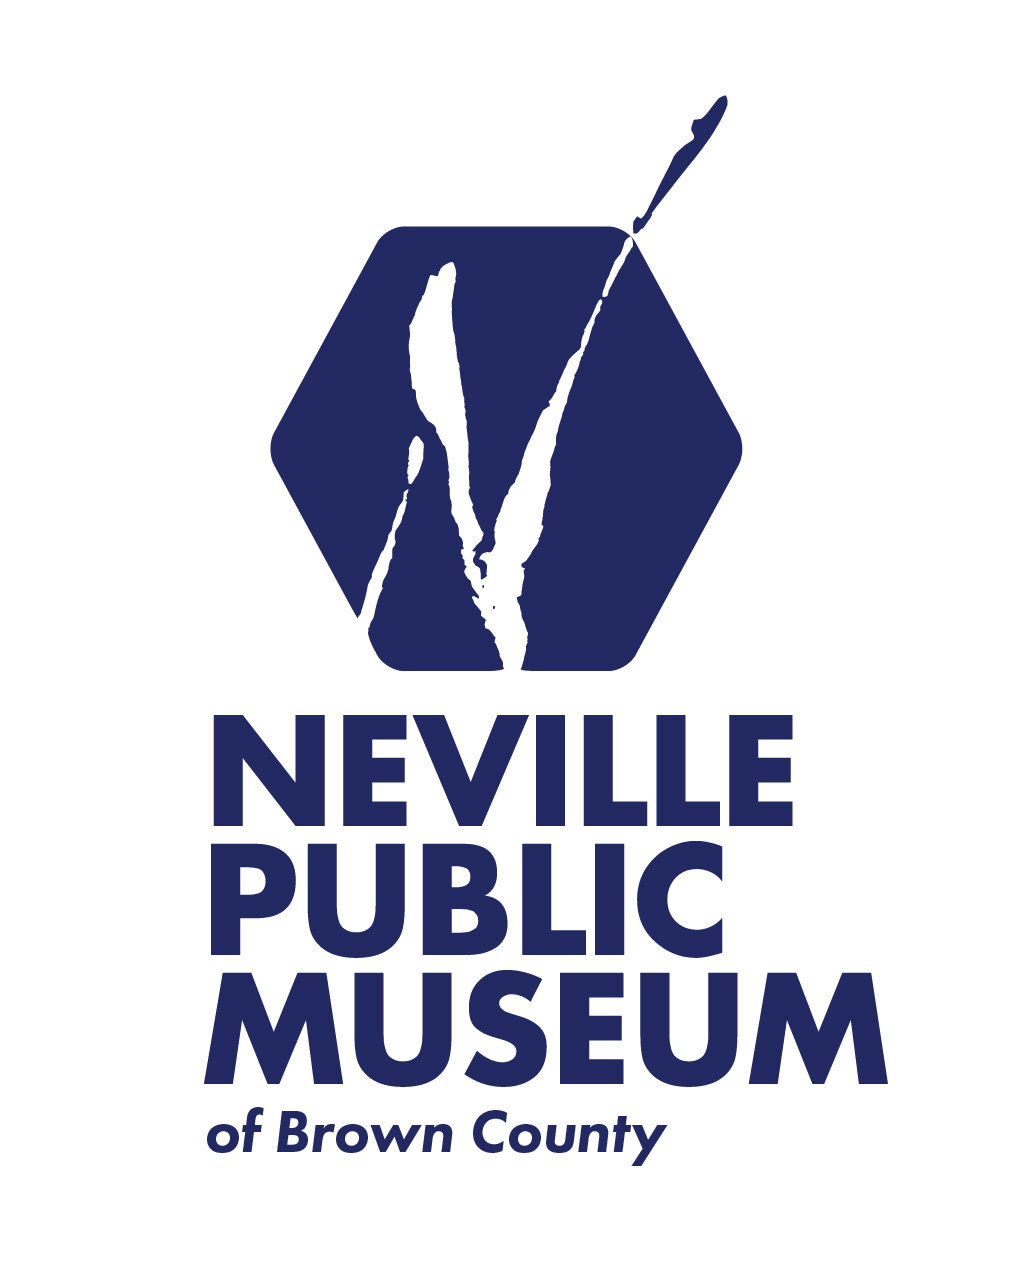 Nevill Public Museum of Brown County logo